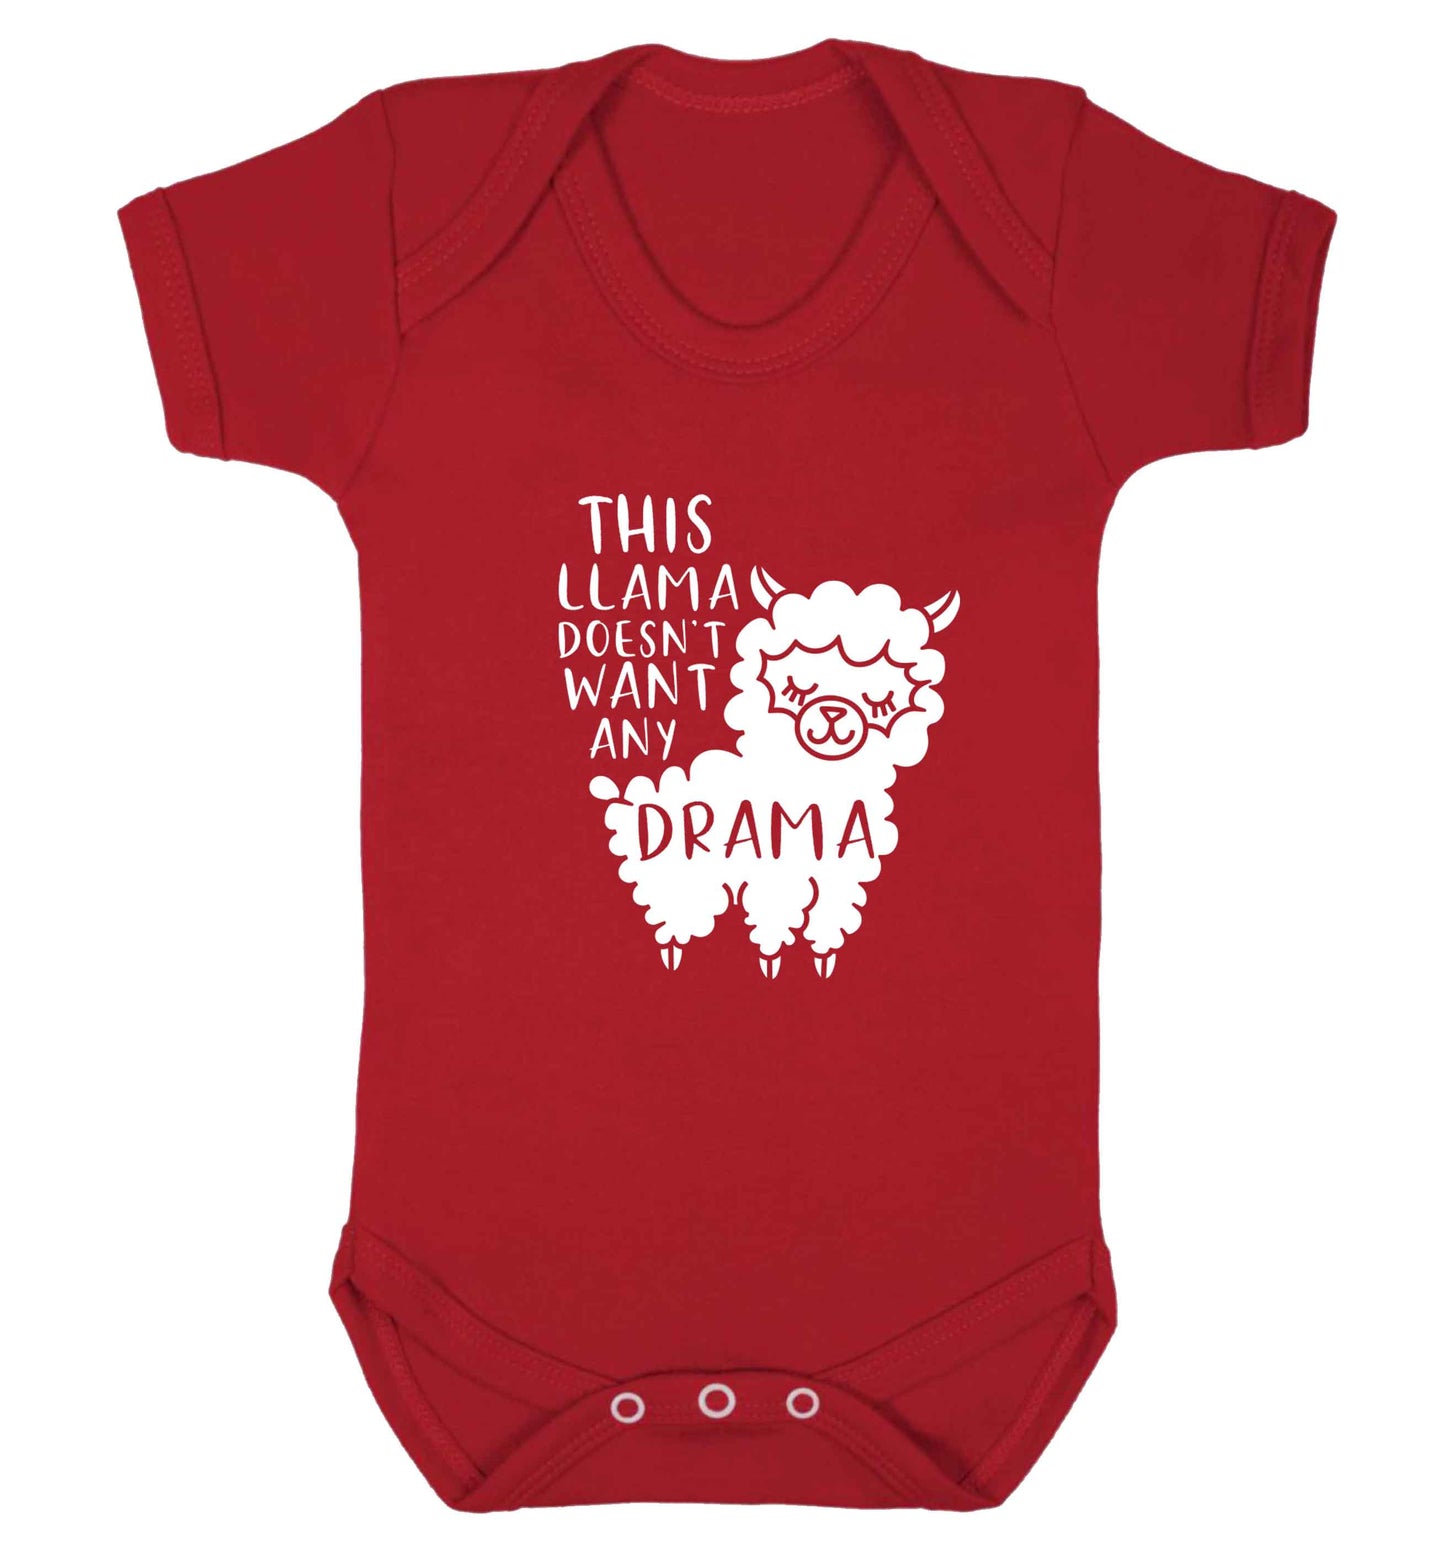 This Llama doesn't want any drama baby vest red 18-24 months